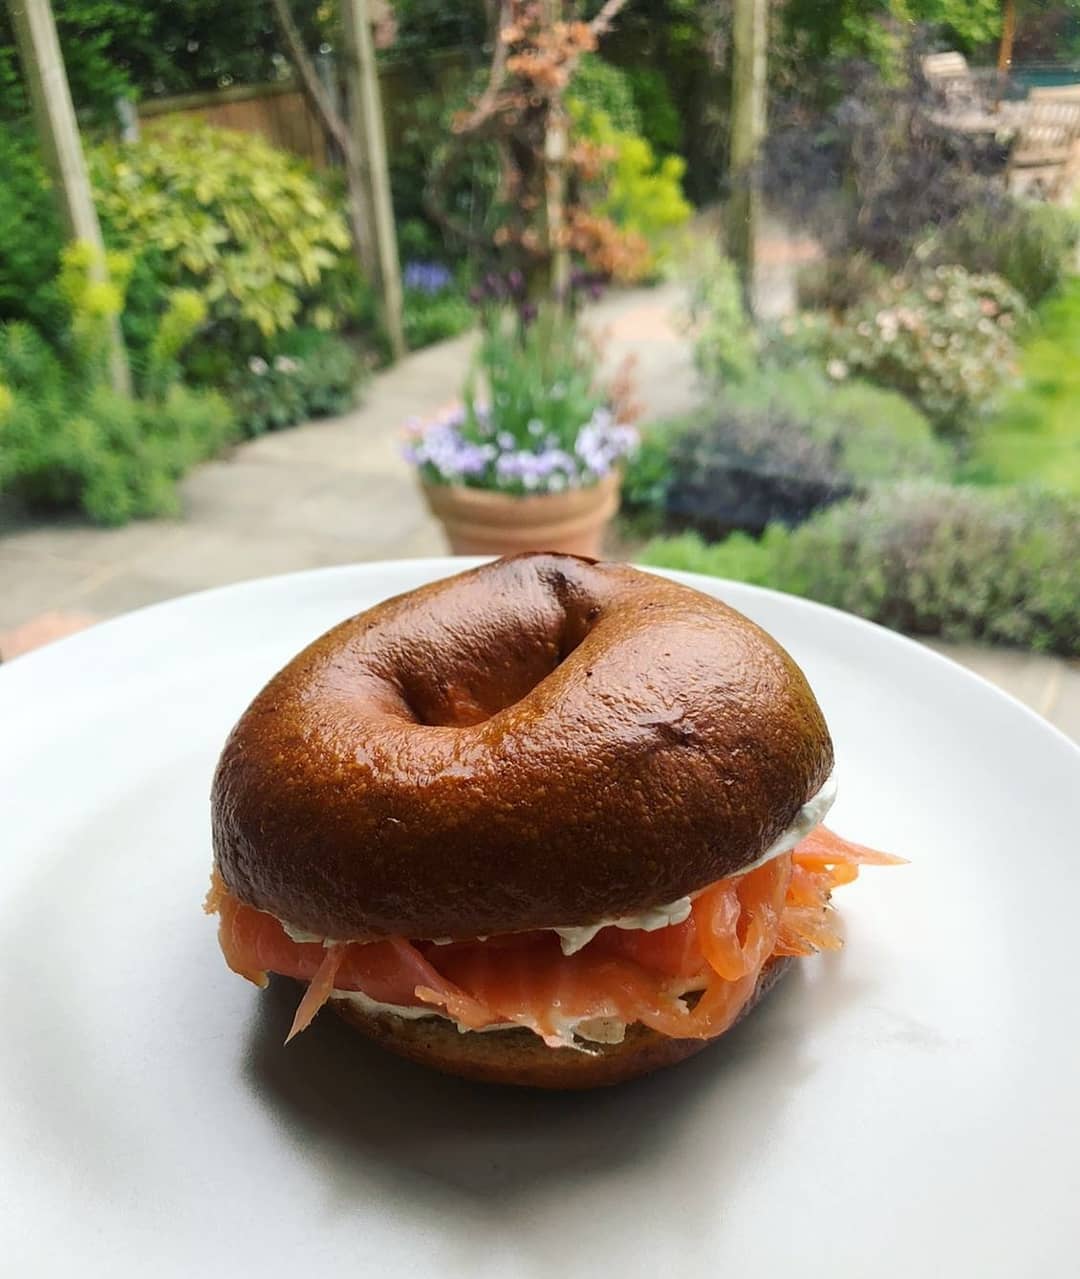 A plain bagel containing cream cheese and fresh smoked salmon.